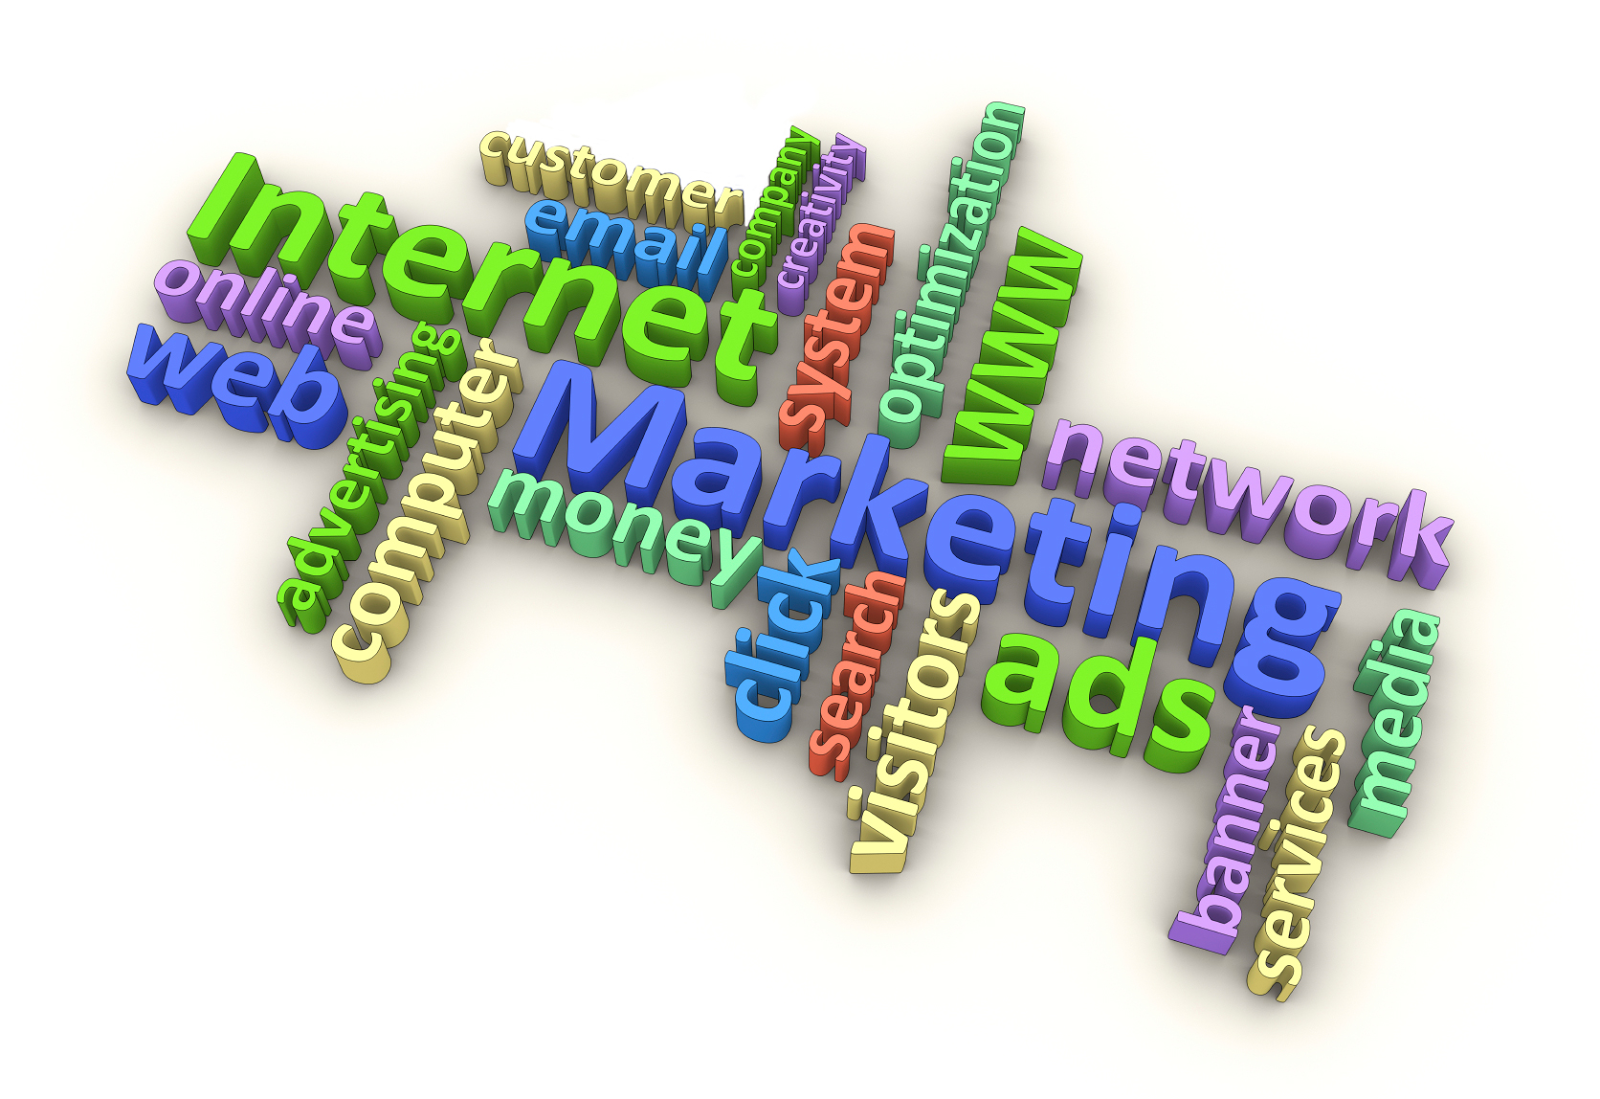 ... Reasons Marketing Students in India Should Learn Digital Marketing